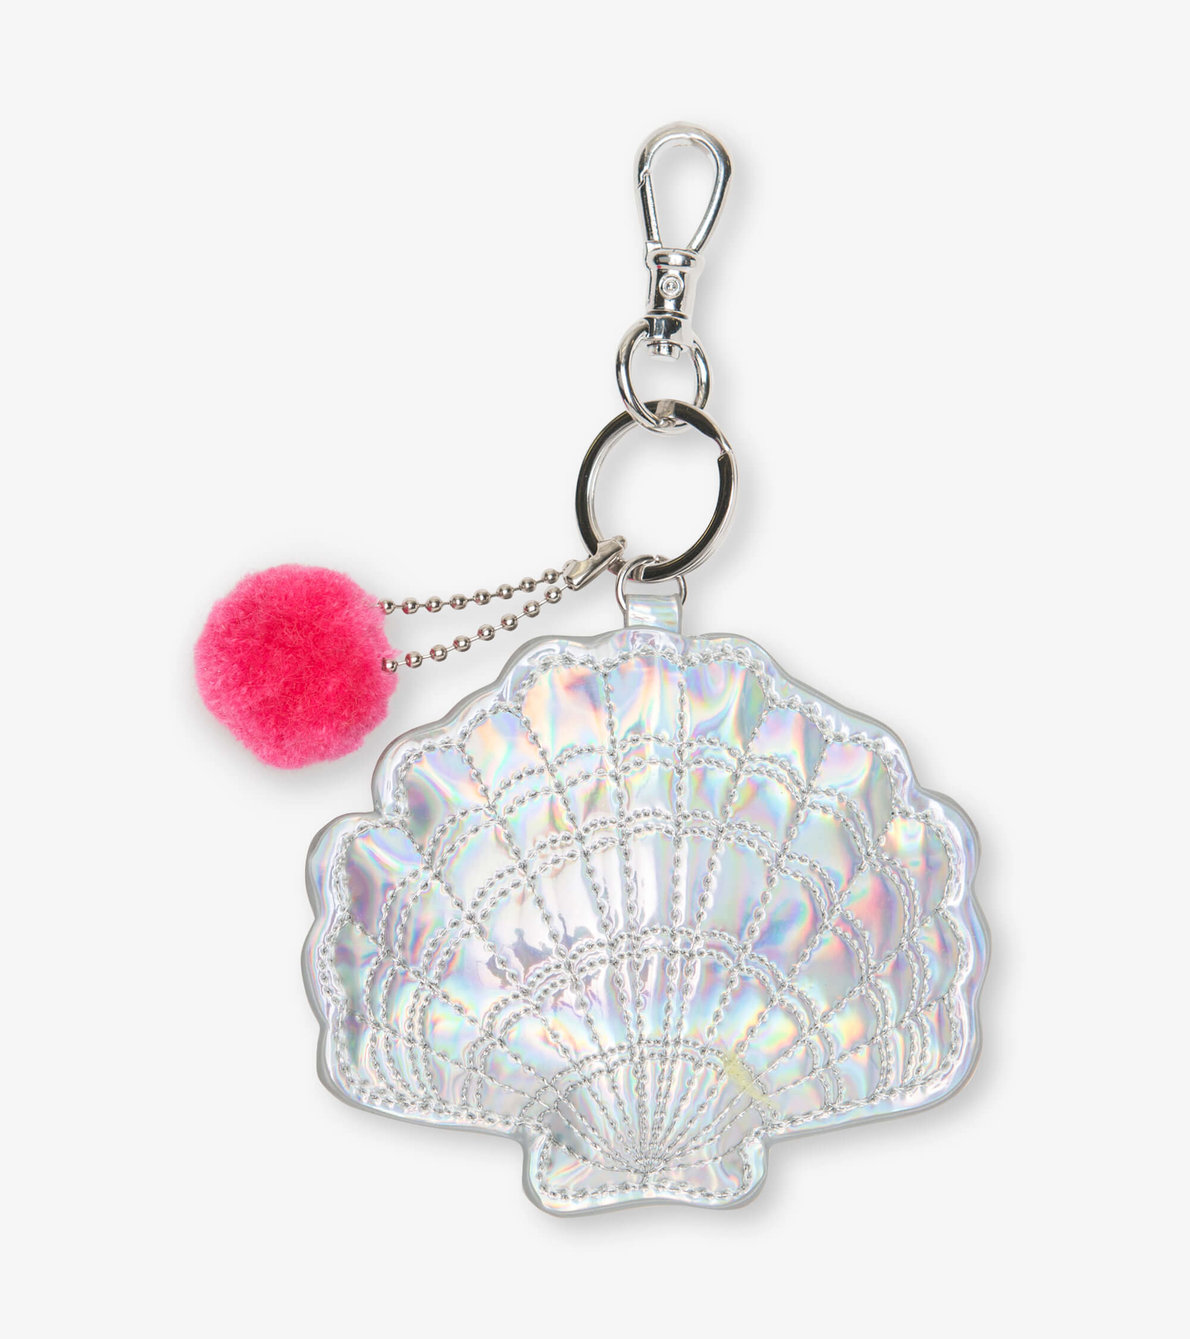 View larger image of Holographic Shell Bag Charm